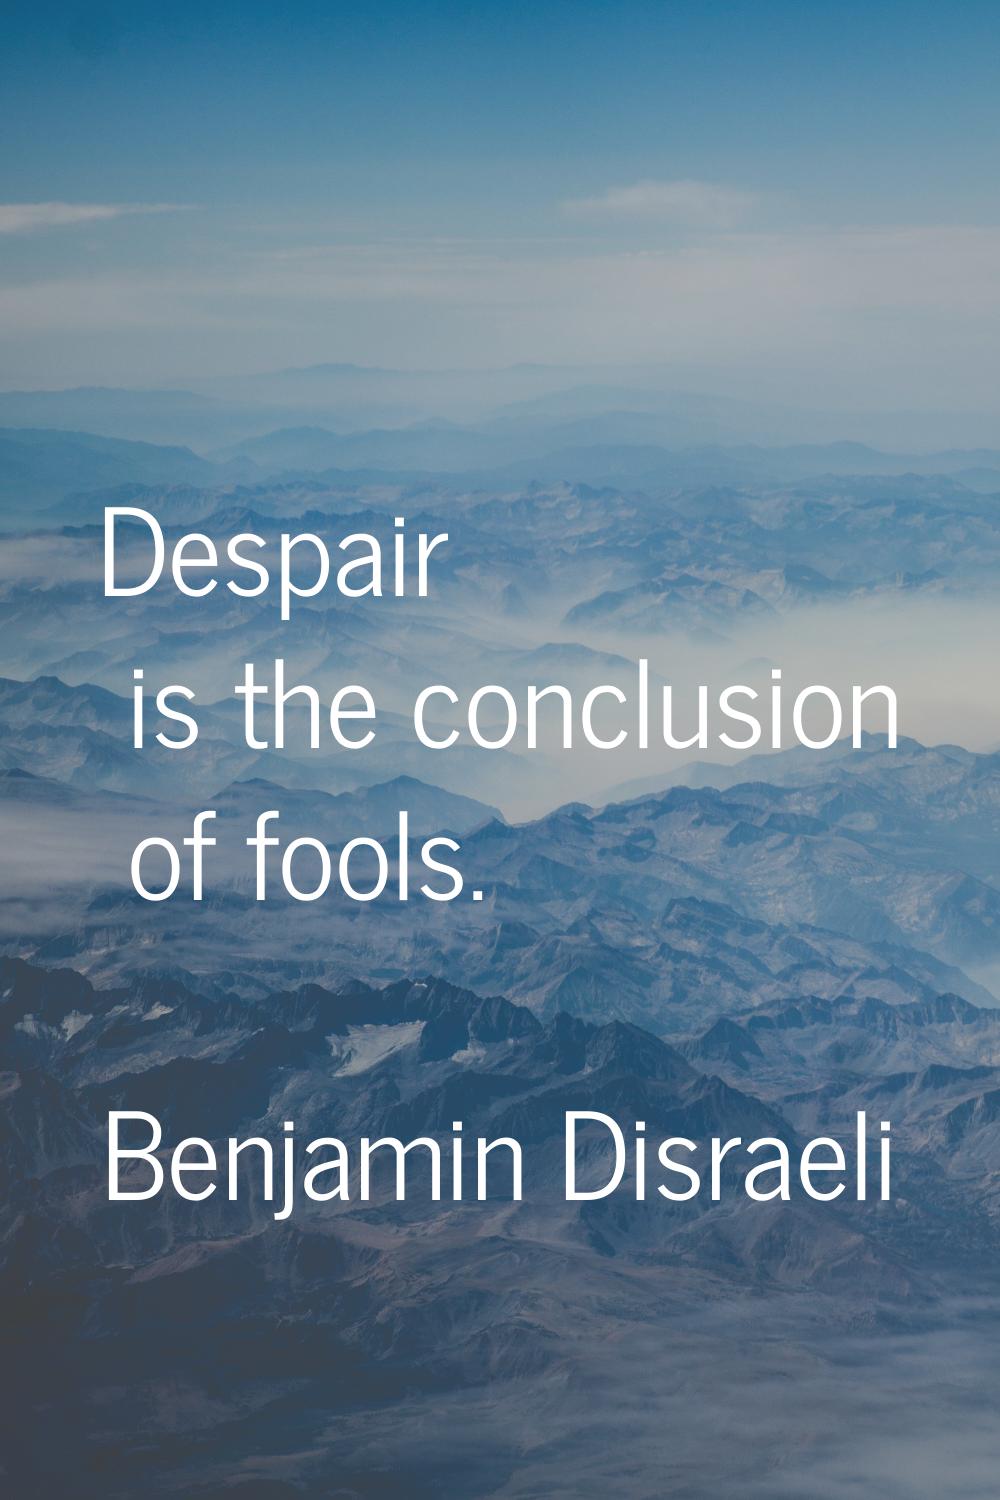 Despair is the conclusion of fools.